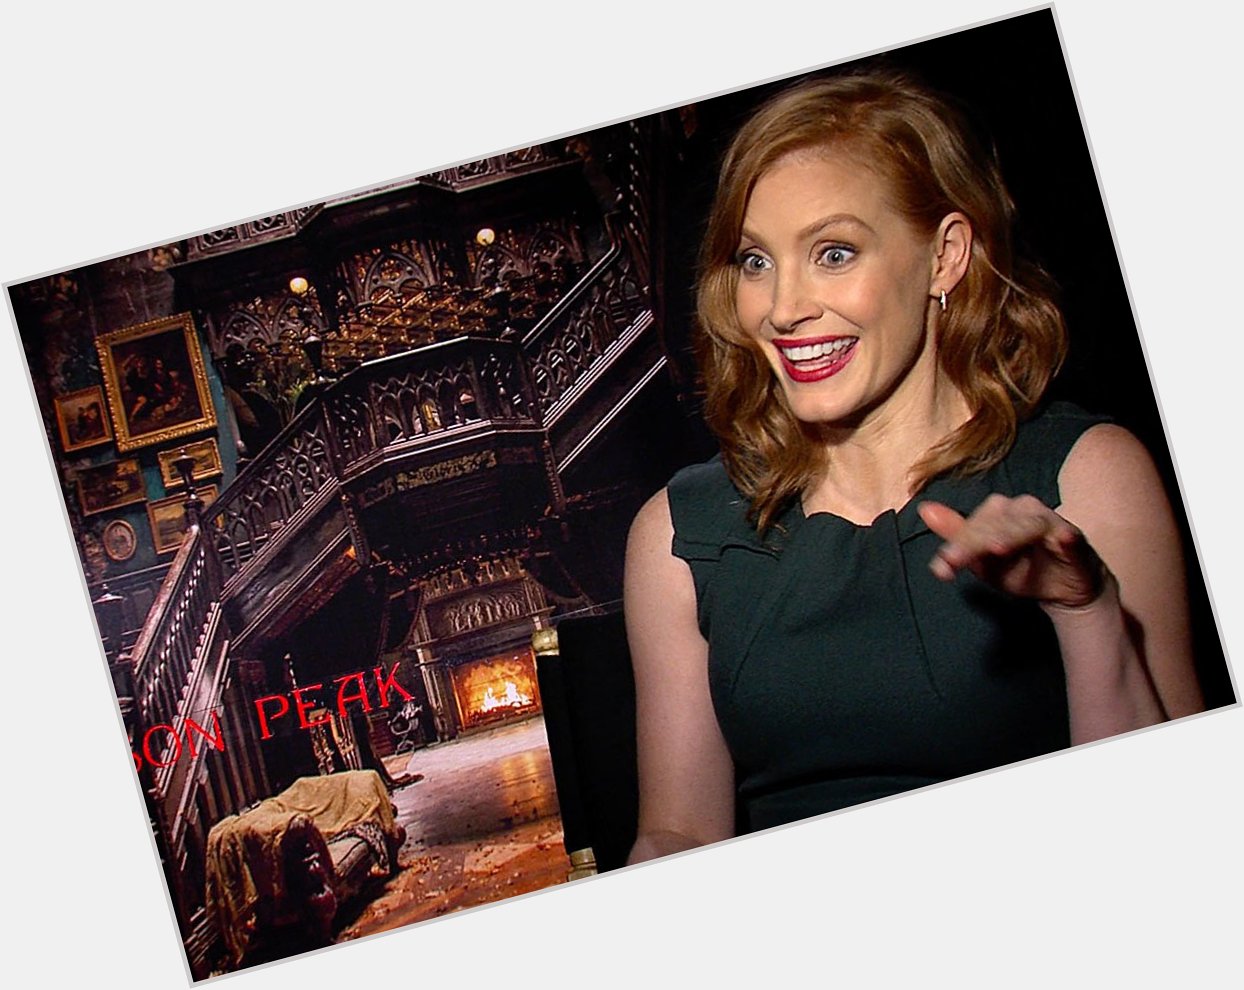 Happy birthday to jessica chastain. can\t wait to see her in it chapter two. 